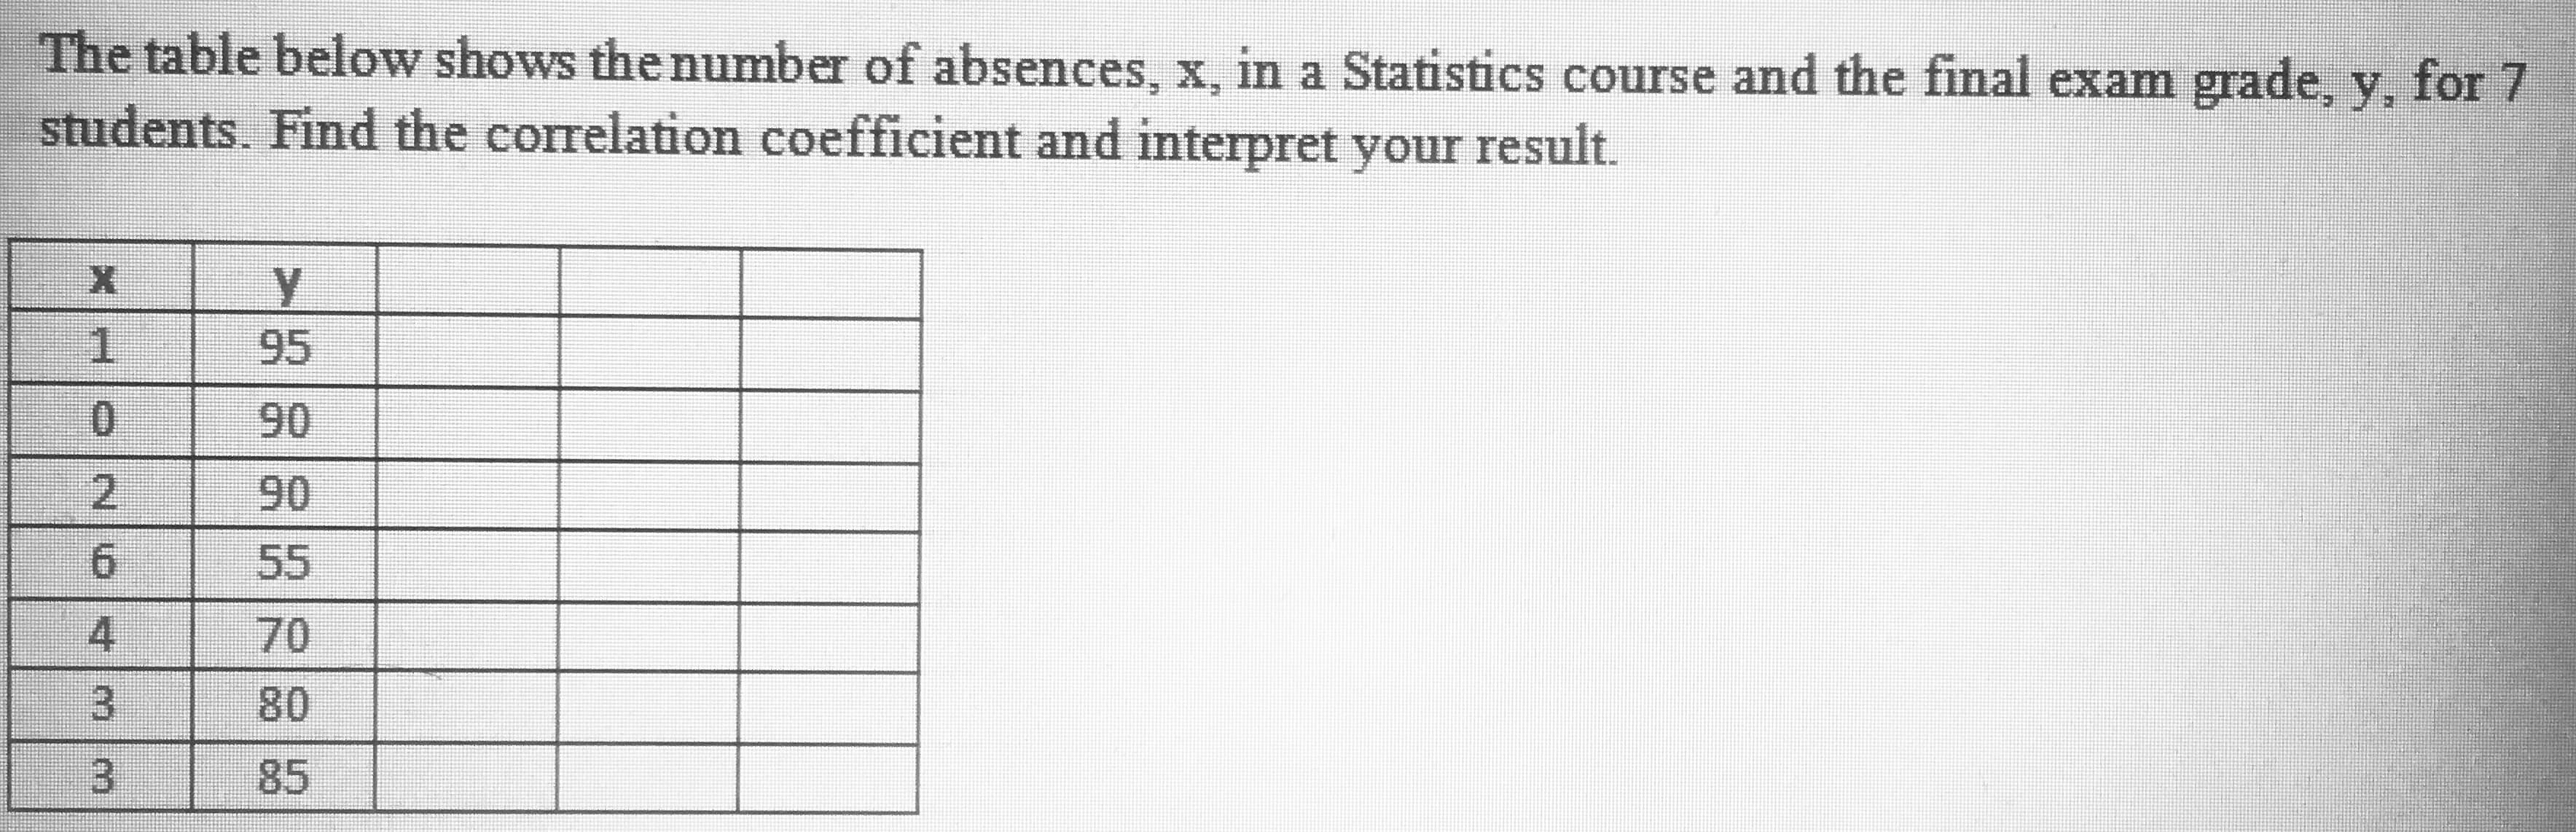 The table below shows the number of absences, x, in a Statistics course and the final exam grade, y, for 7
students. Find the correlation coefficient and interpret your result.
